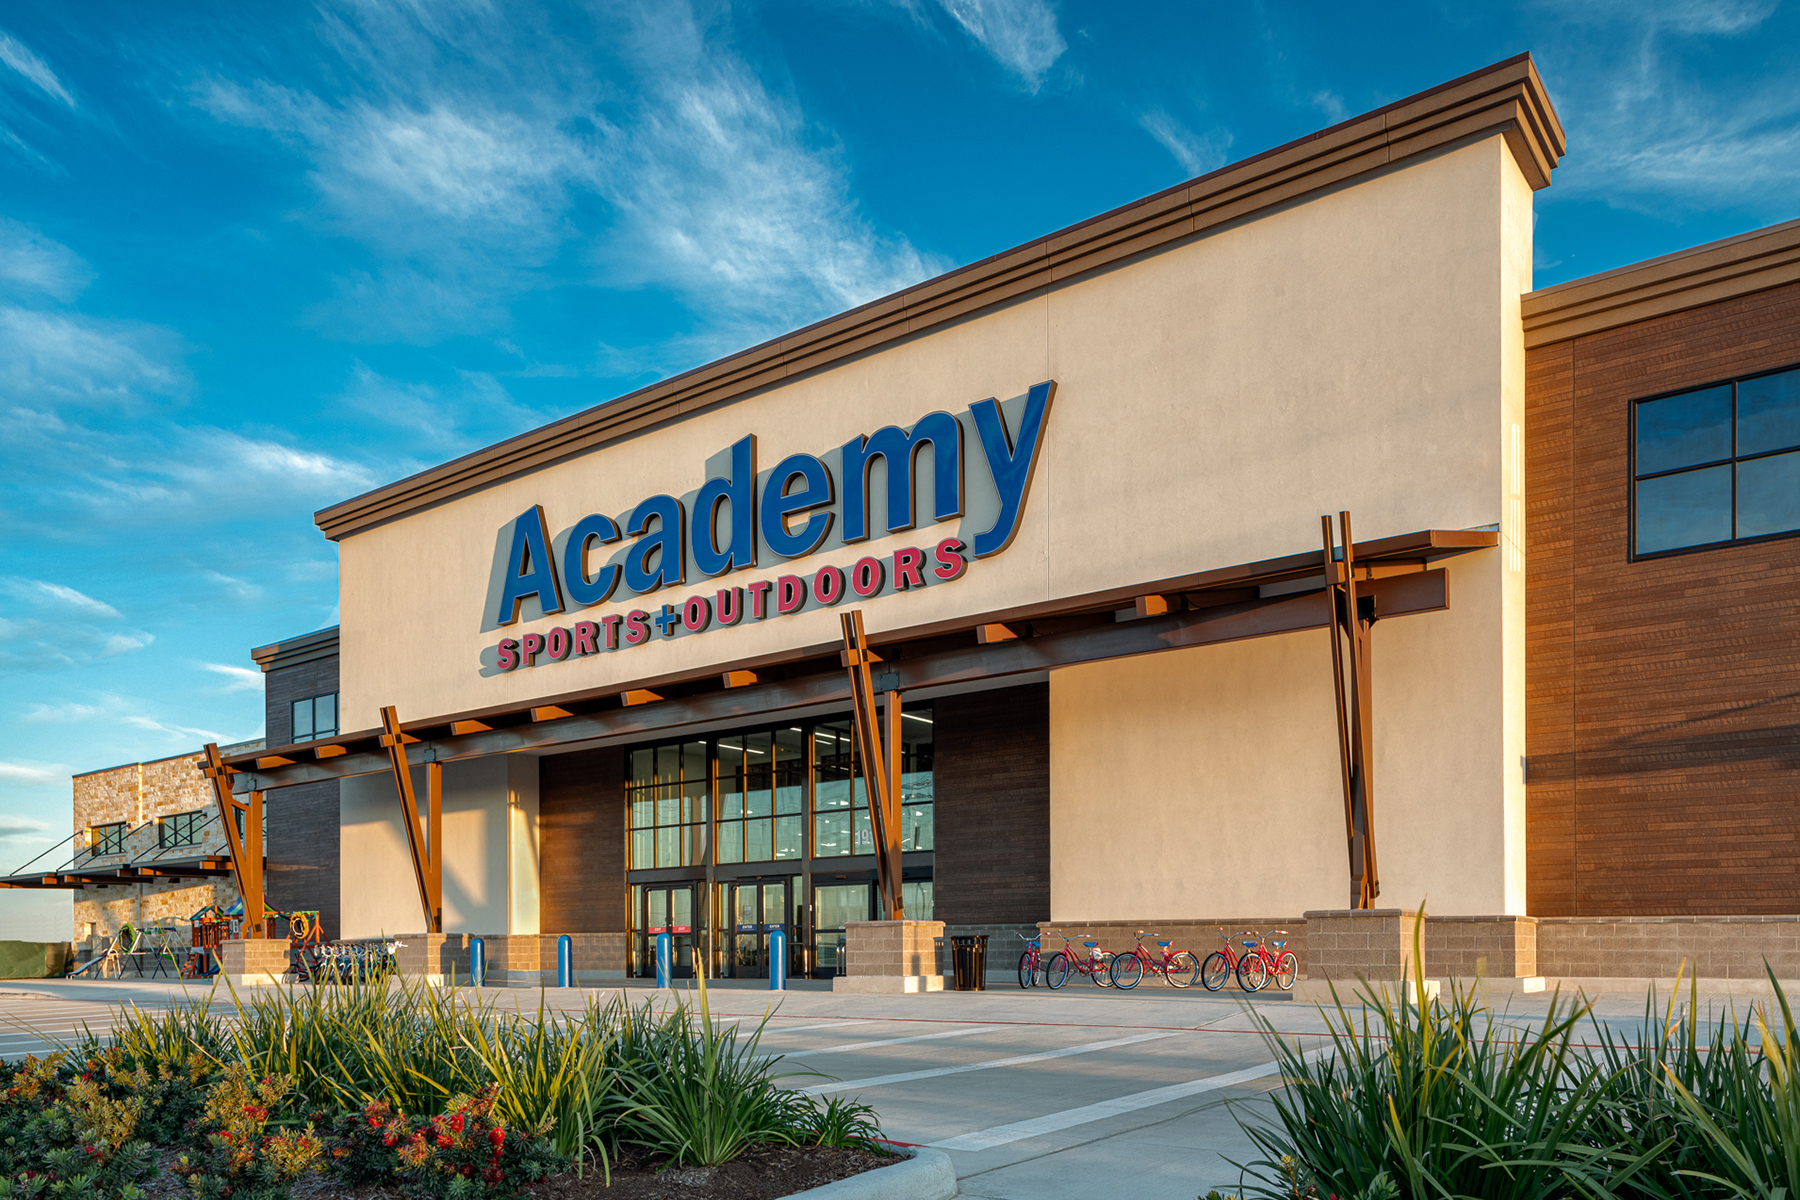 It's a Texas showdown in the ALCS! Academy Sports + Outdoors has